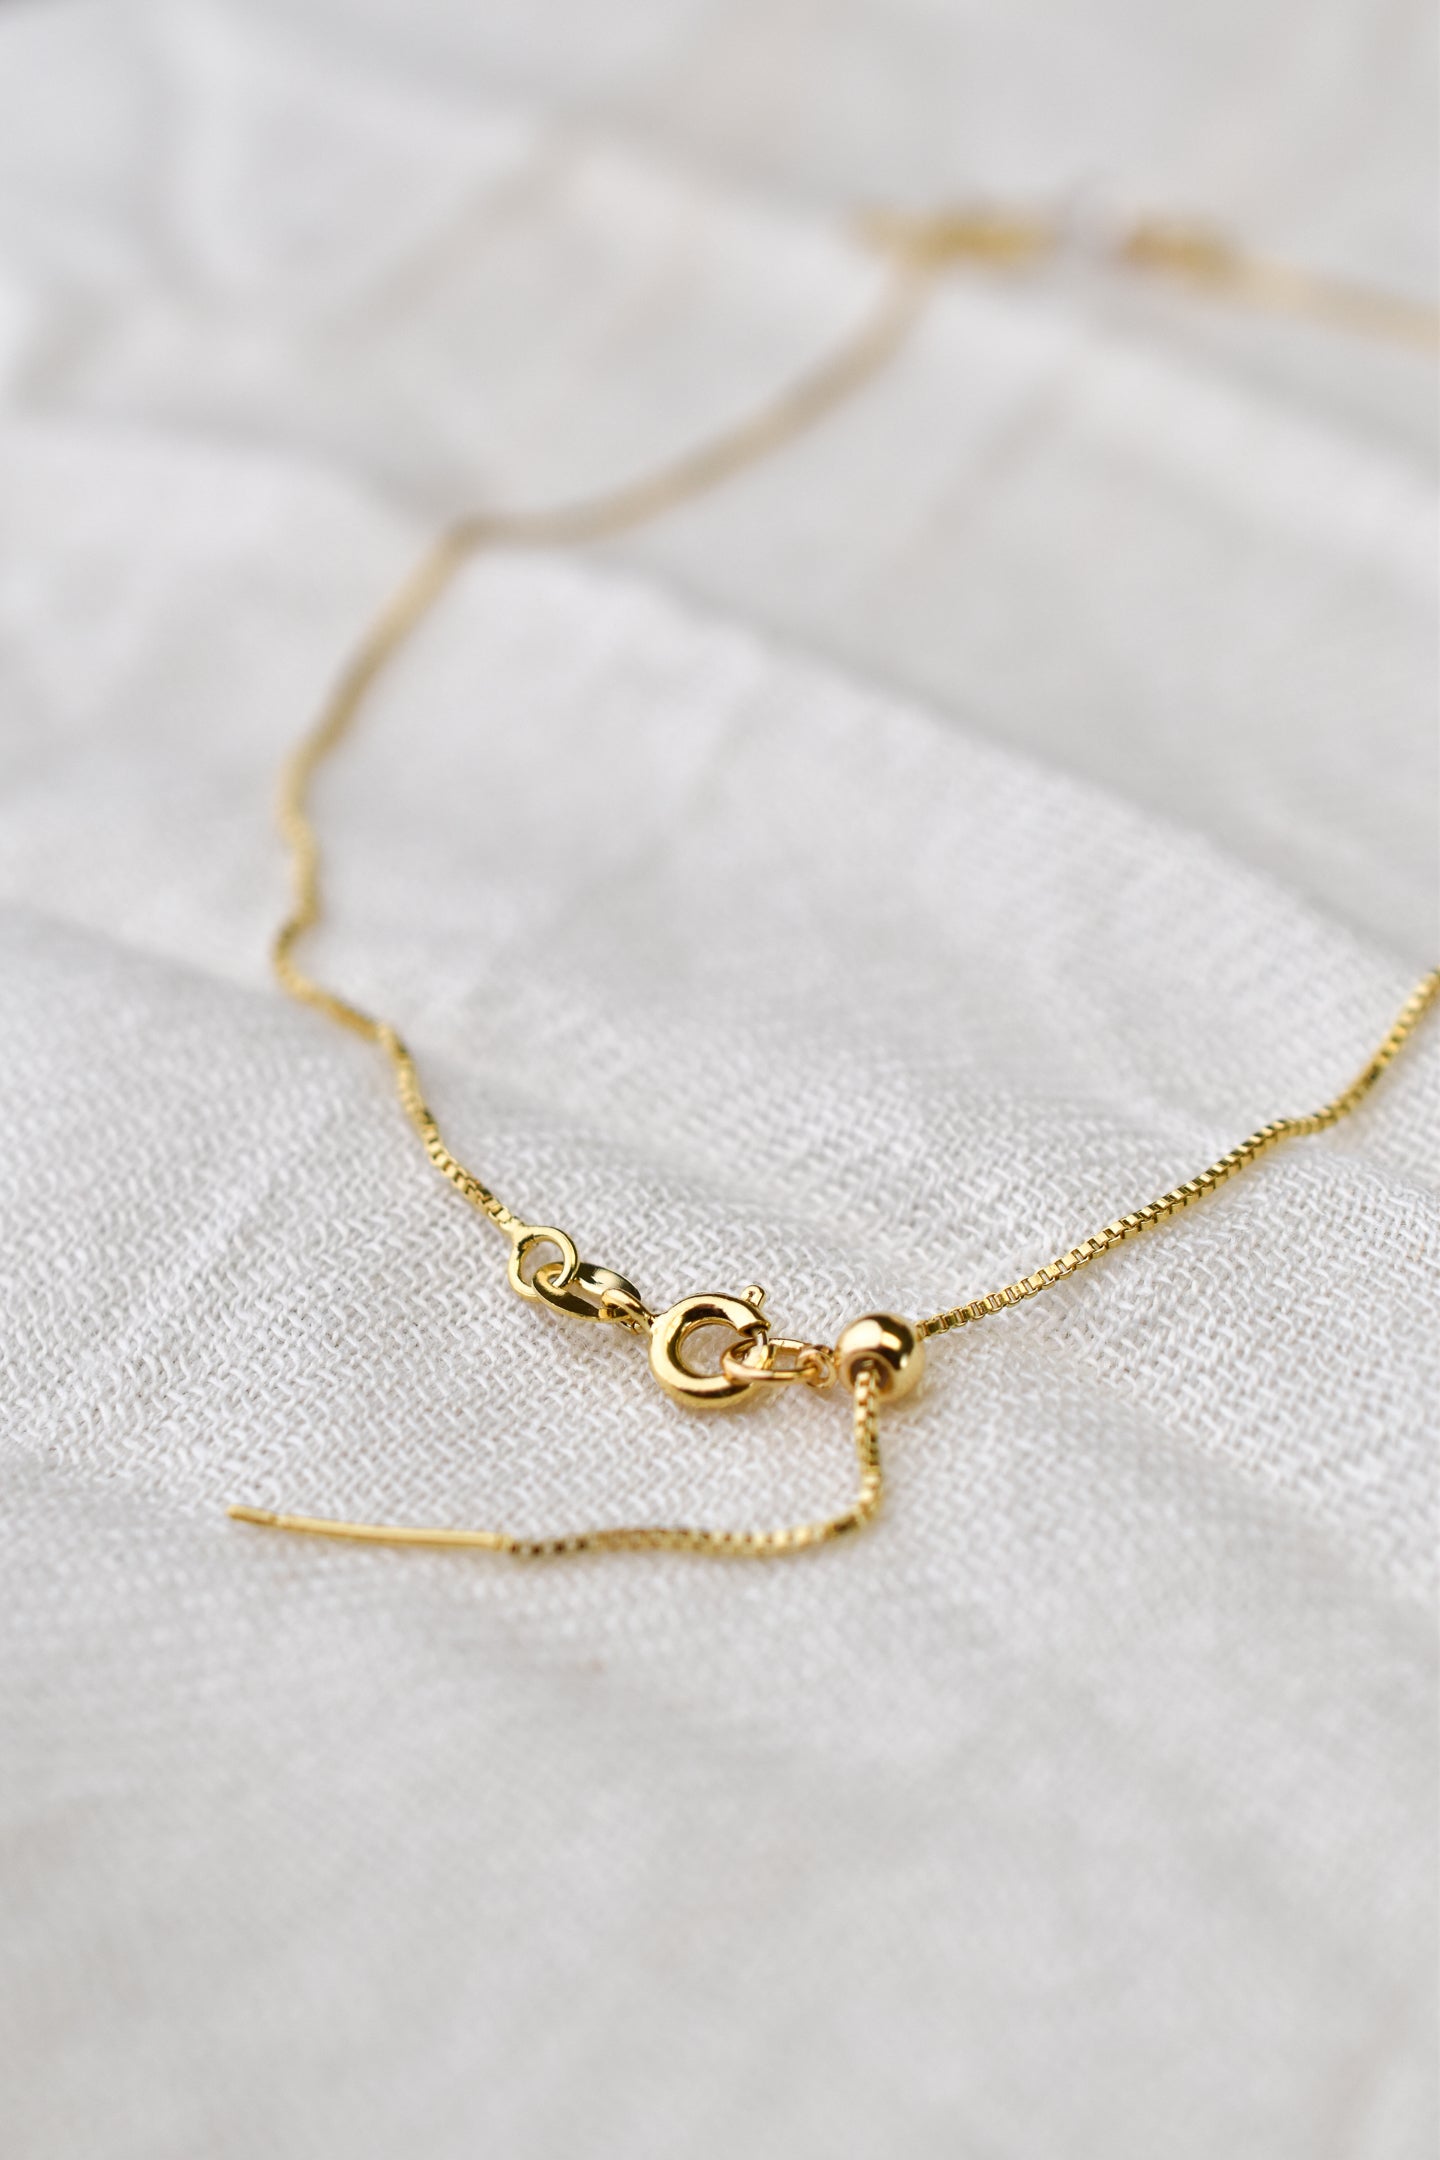 Herkimer Diamond Necklace - Gold-Filled Adjustable Chain